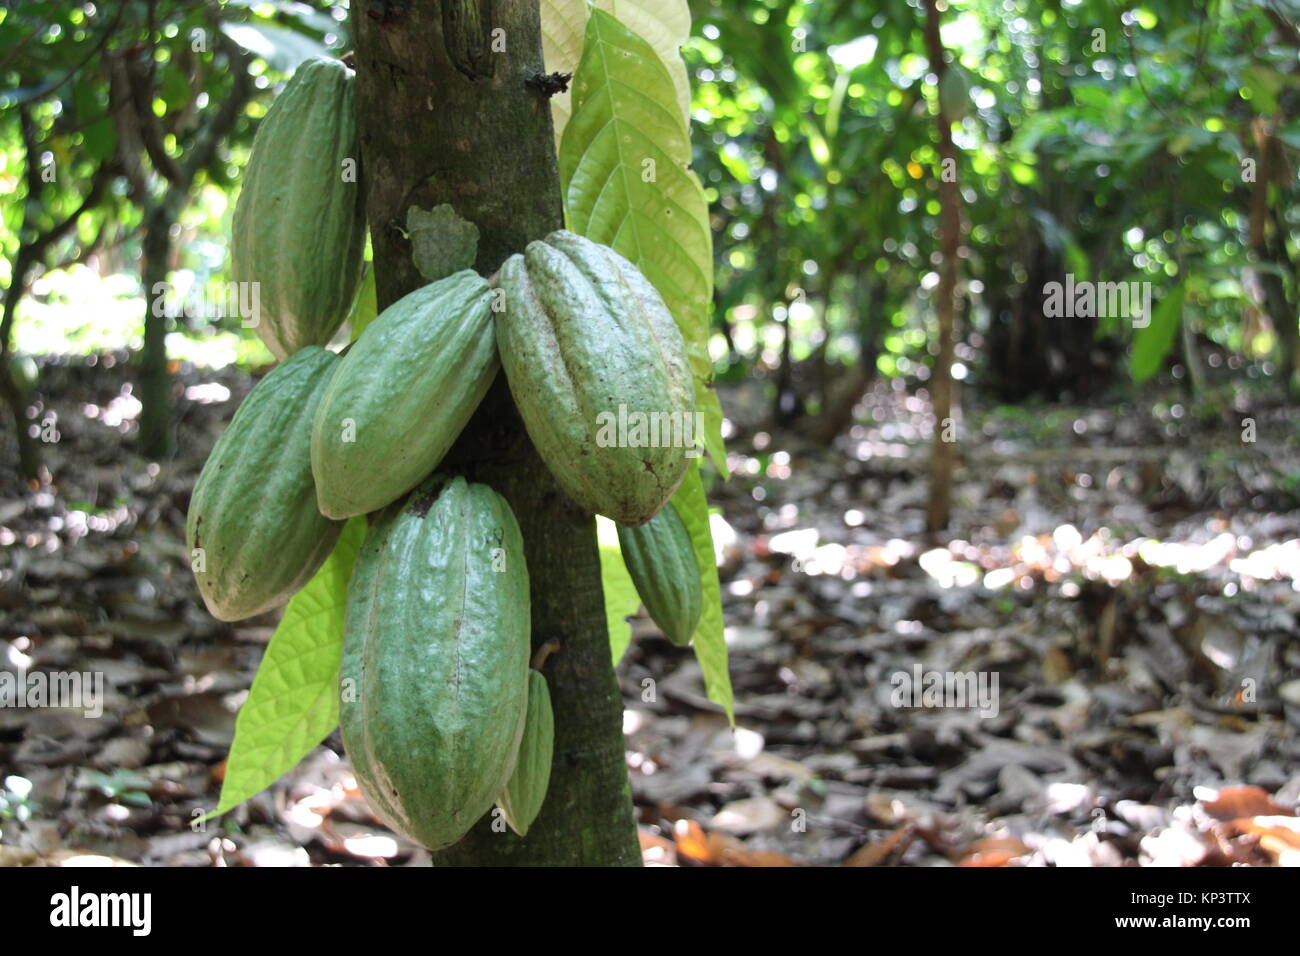 Affiakounou, Ivory Coast. 1st Dec, 2017. Cocoa pods that are not ripe yet hang on a tree in Affiakounou, Ivory Coast, 1 December 2017. Most chocolate in Germany comes from Weste Africa, where more and more children work in the cocoa plantations. Credit: Jürgen Bätz/dpa/Alamy Live News Stock Photo